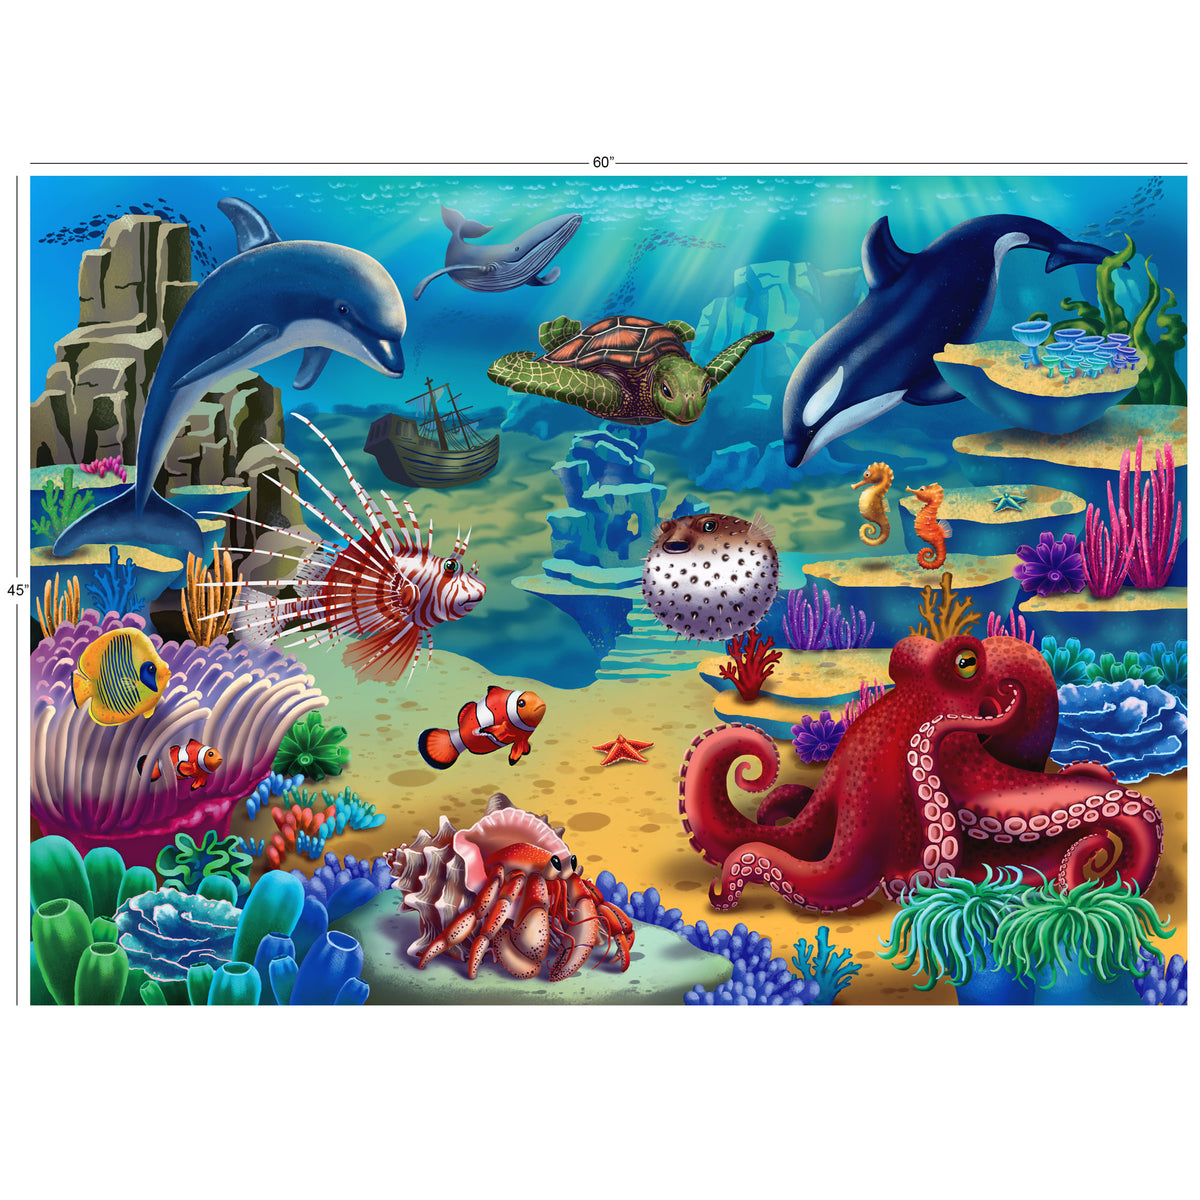 Colorful Underwater World Panel 45x60"